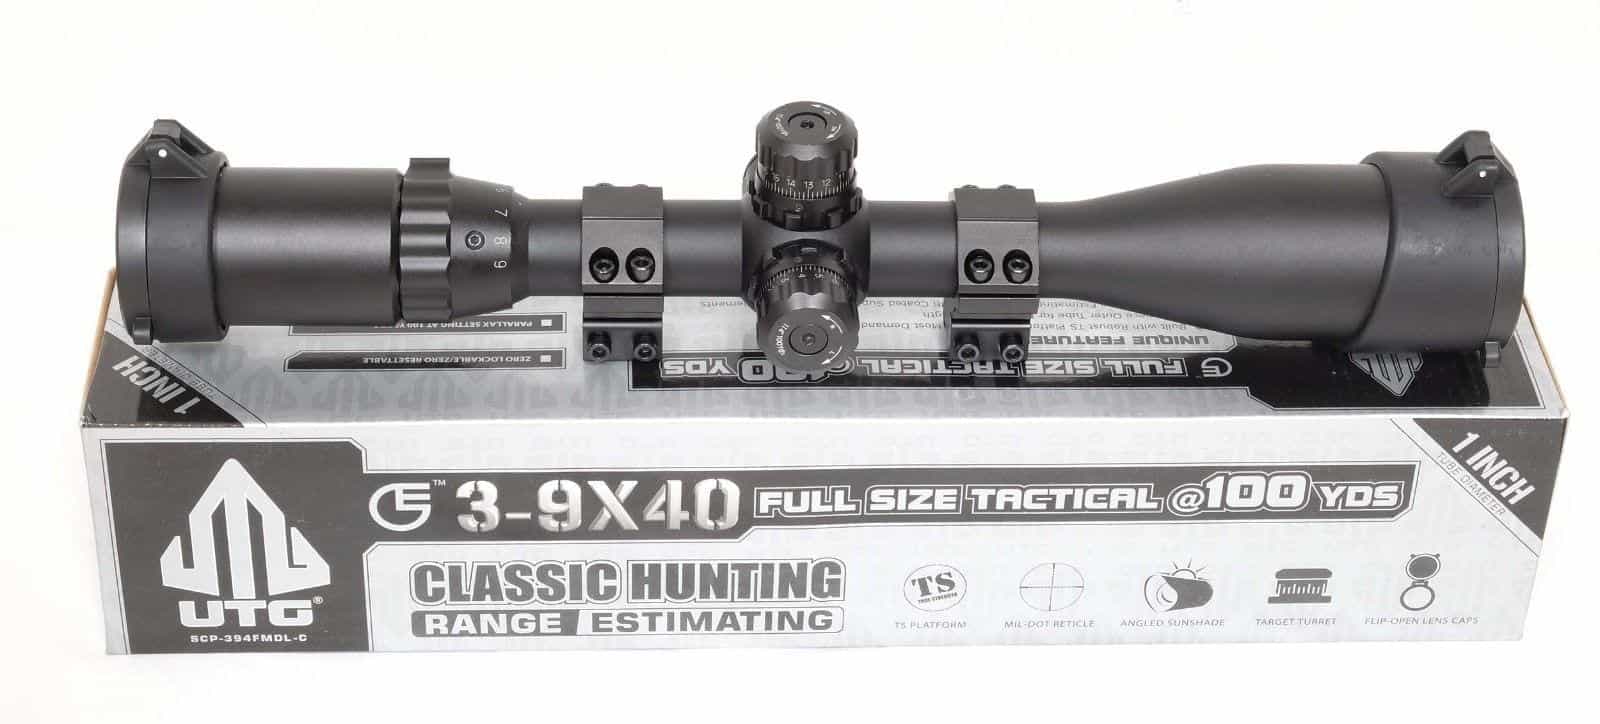 Airsoft Sniper Scope: What to use? - Sniper Mechanic